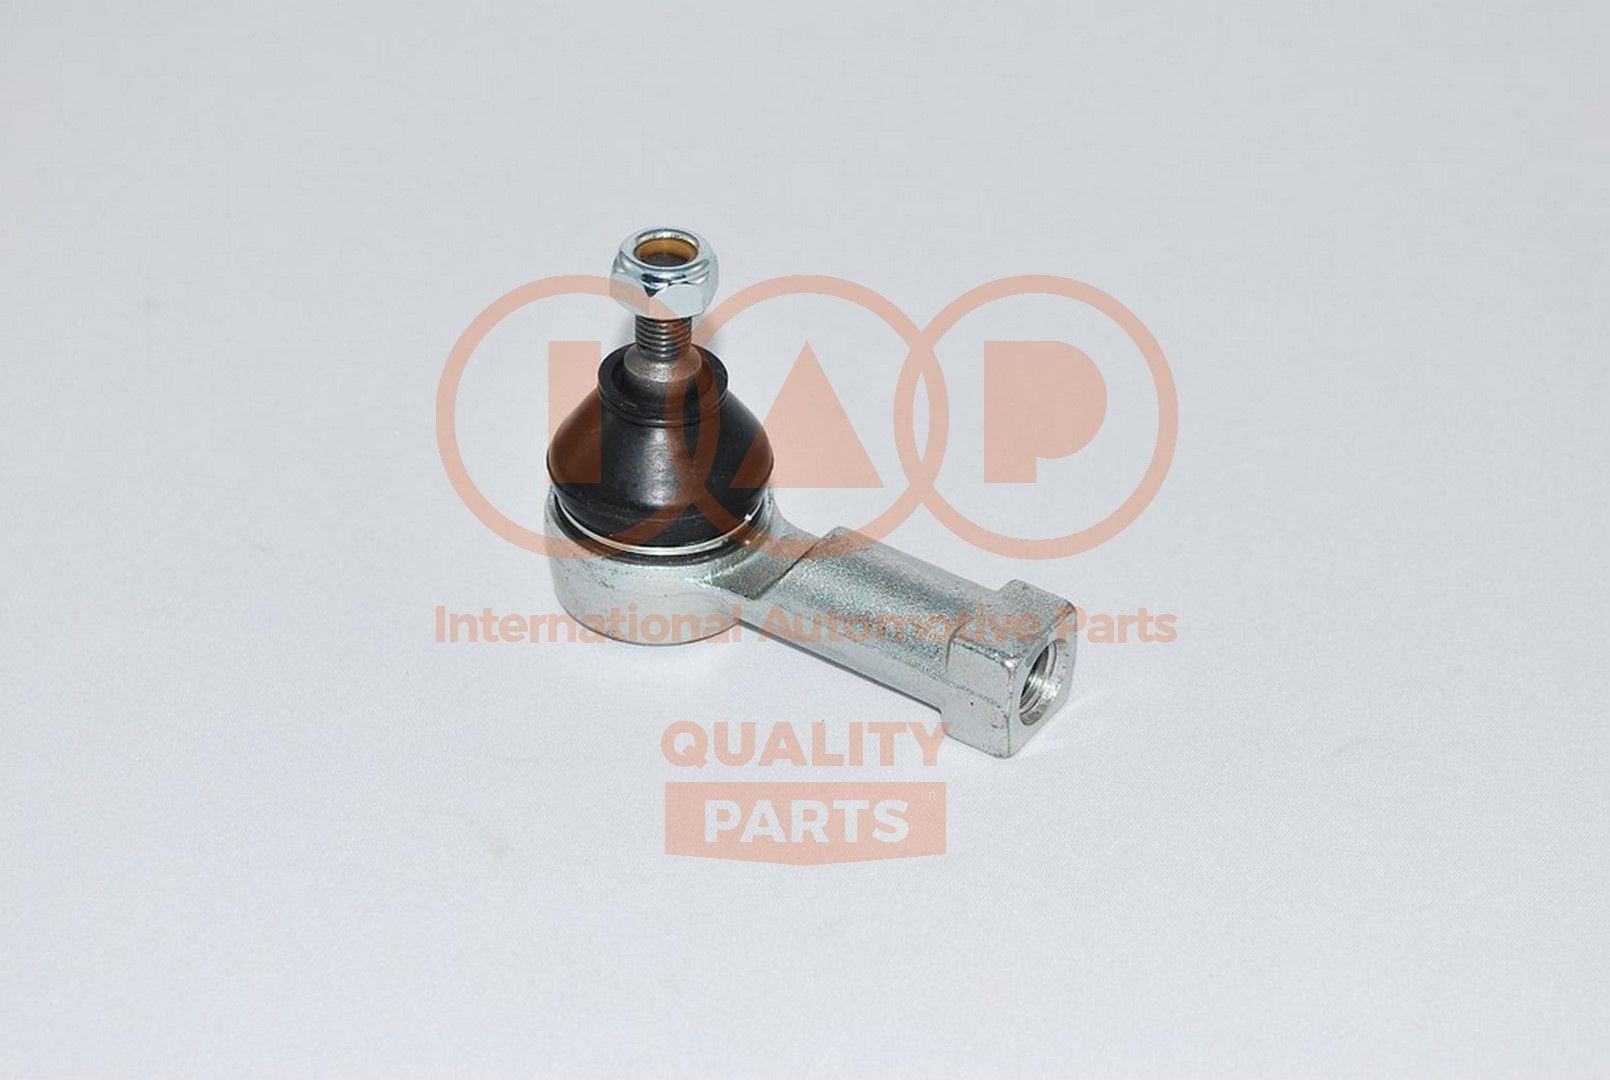 IAP QUALITY PARTS both sides Tie rod end 604-12120 buy